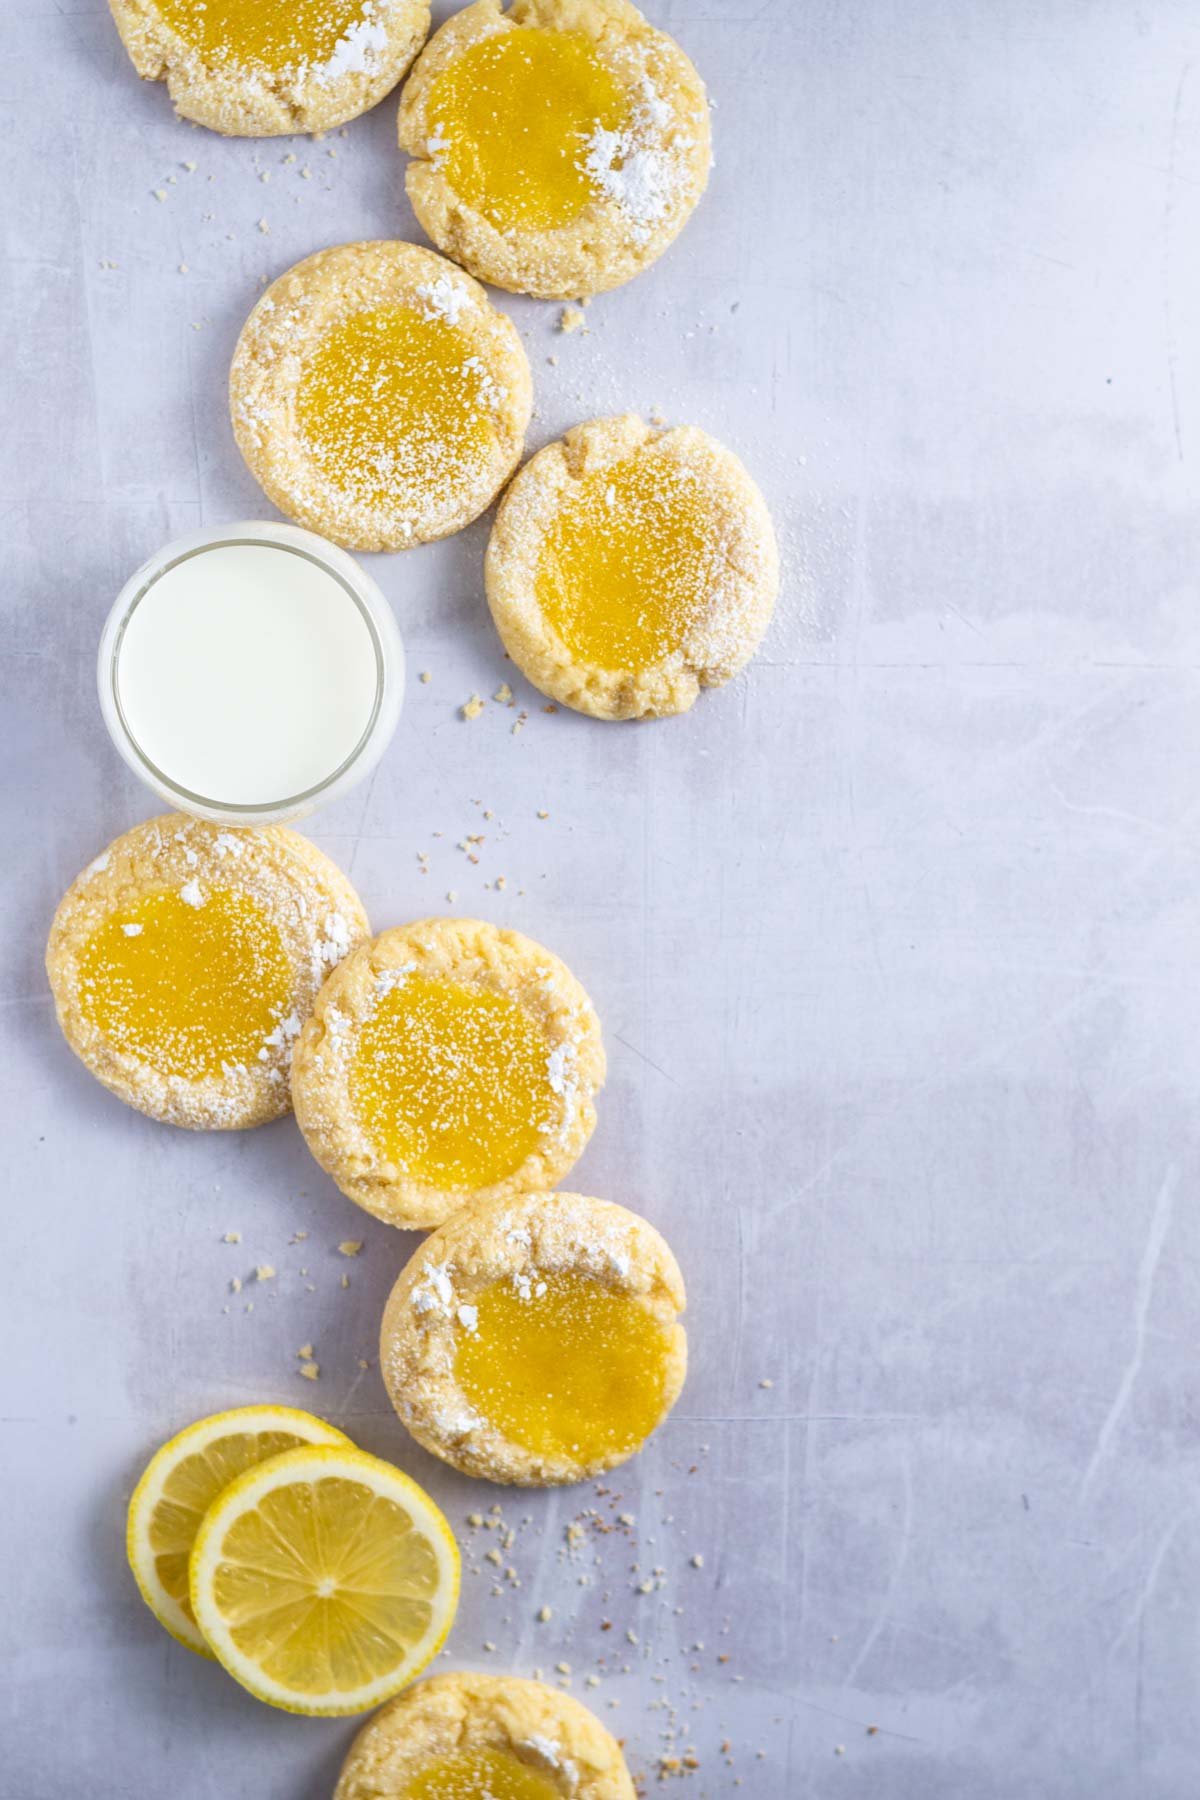 cookies with lemon slices and a glass of milk